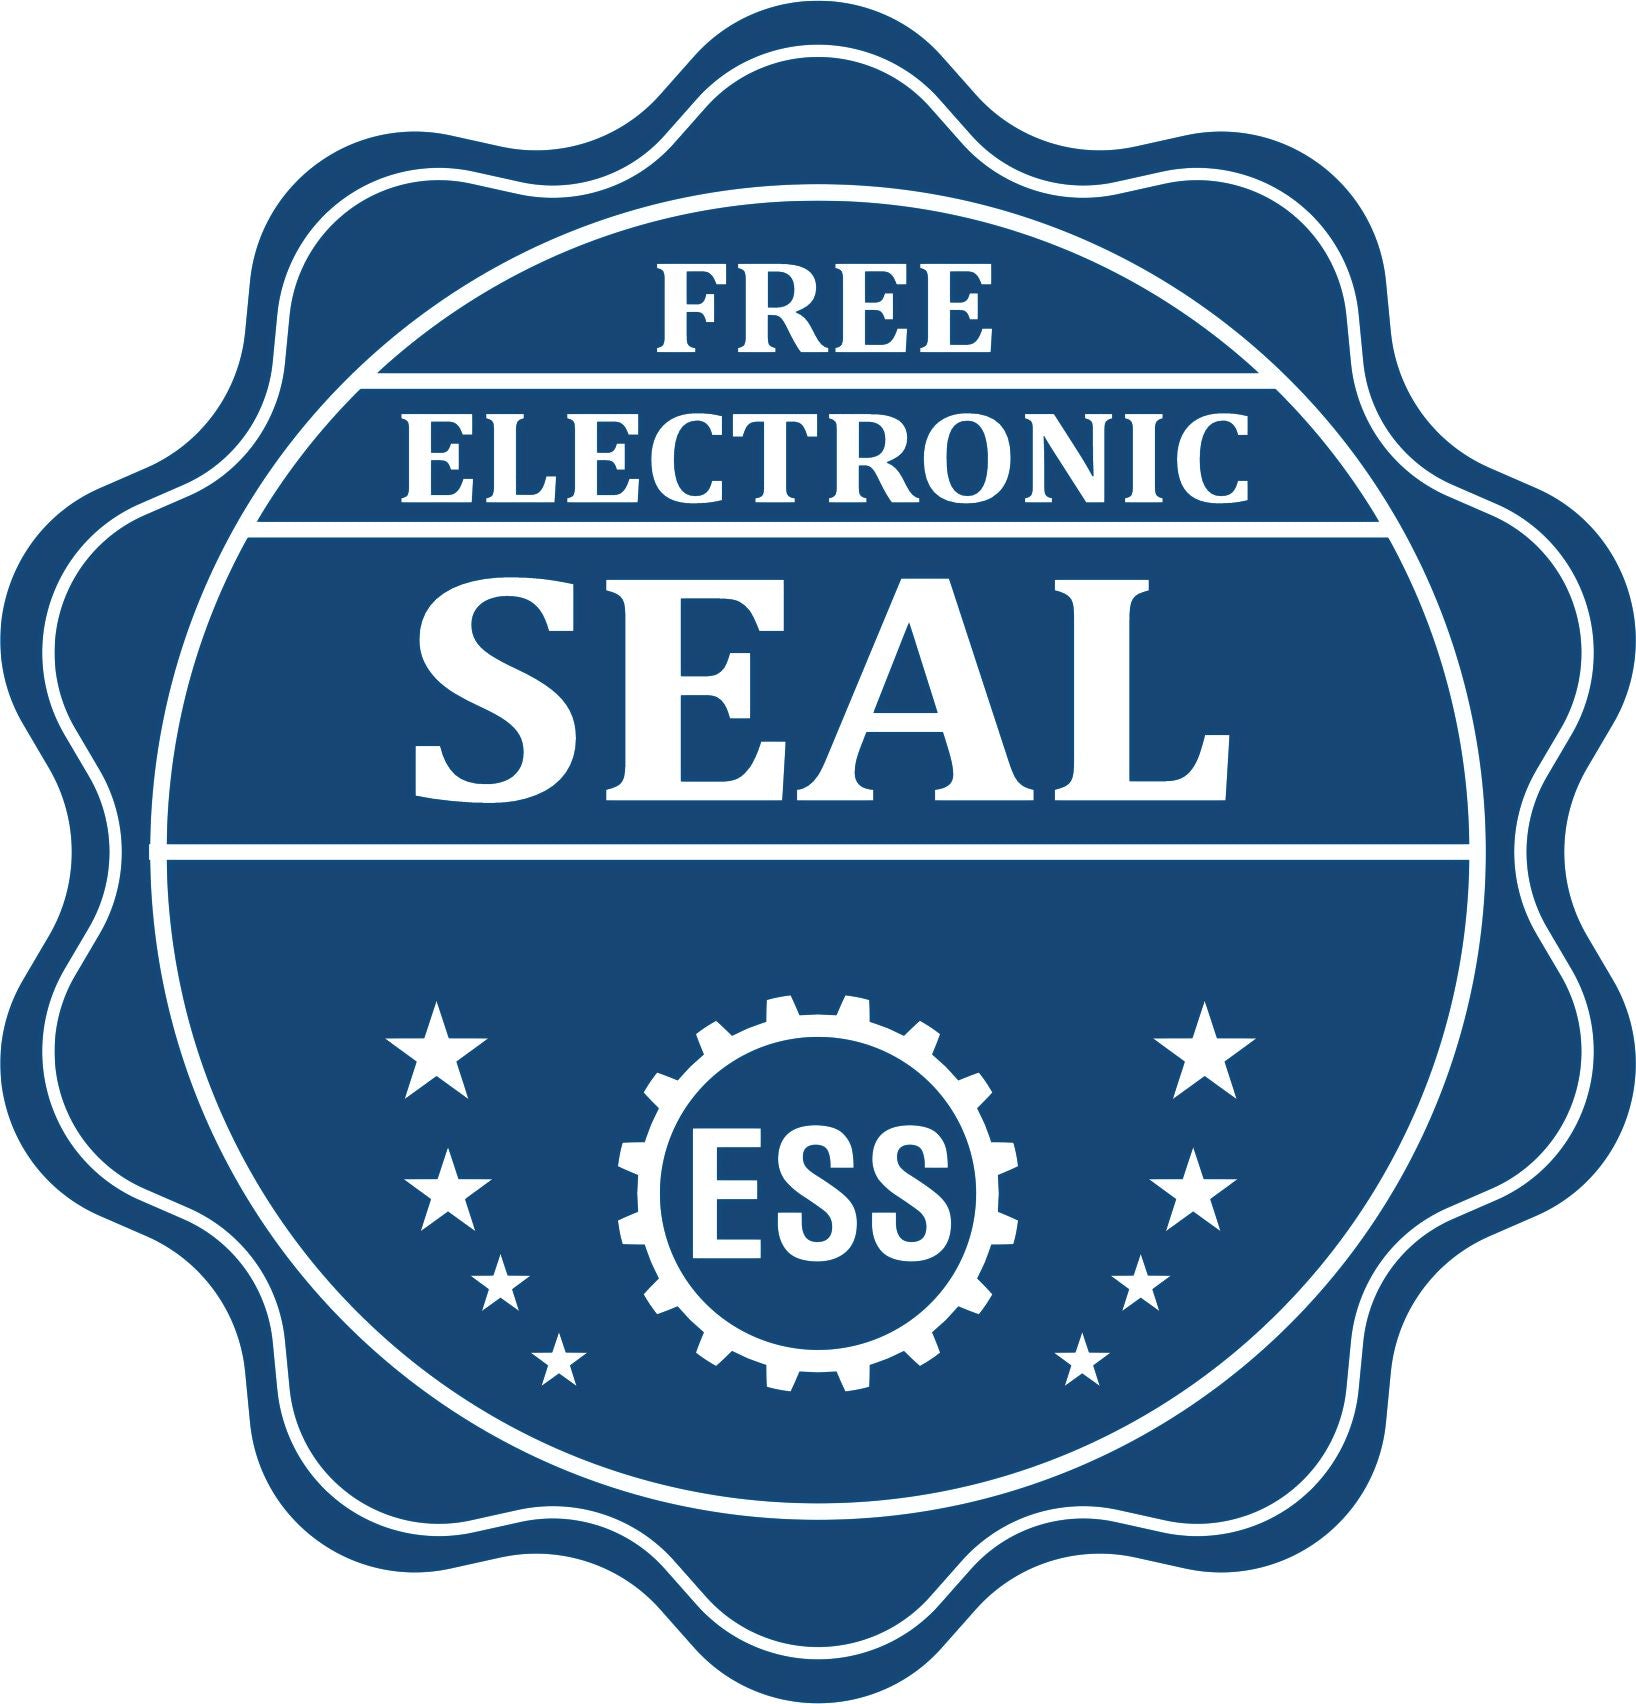 A badge showing a free electronic seal for the Premium MaxLight Pre-Inked North Dakota Landscape Architectural Stamp with stars and the ESS gear on the emblem.